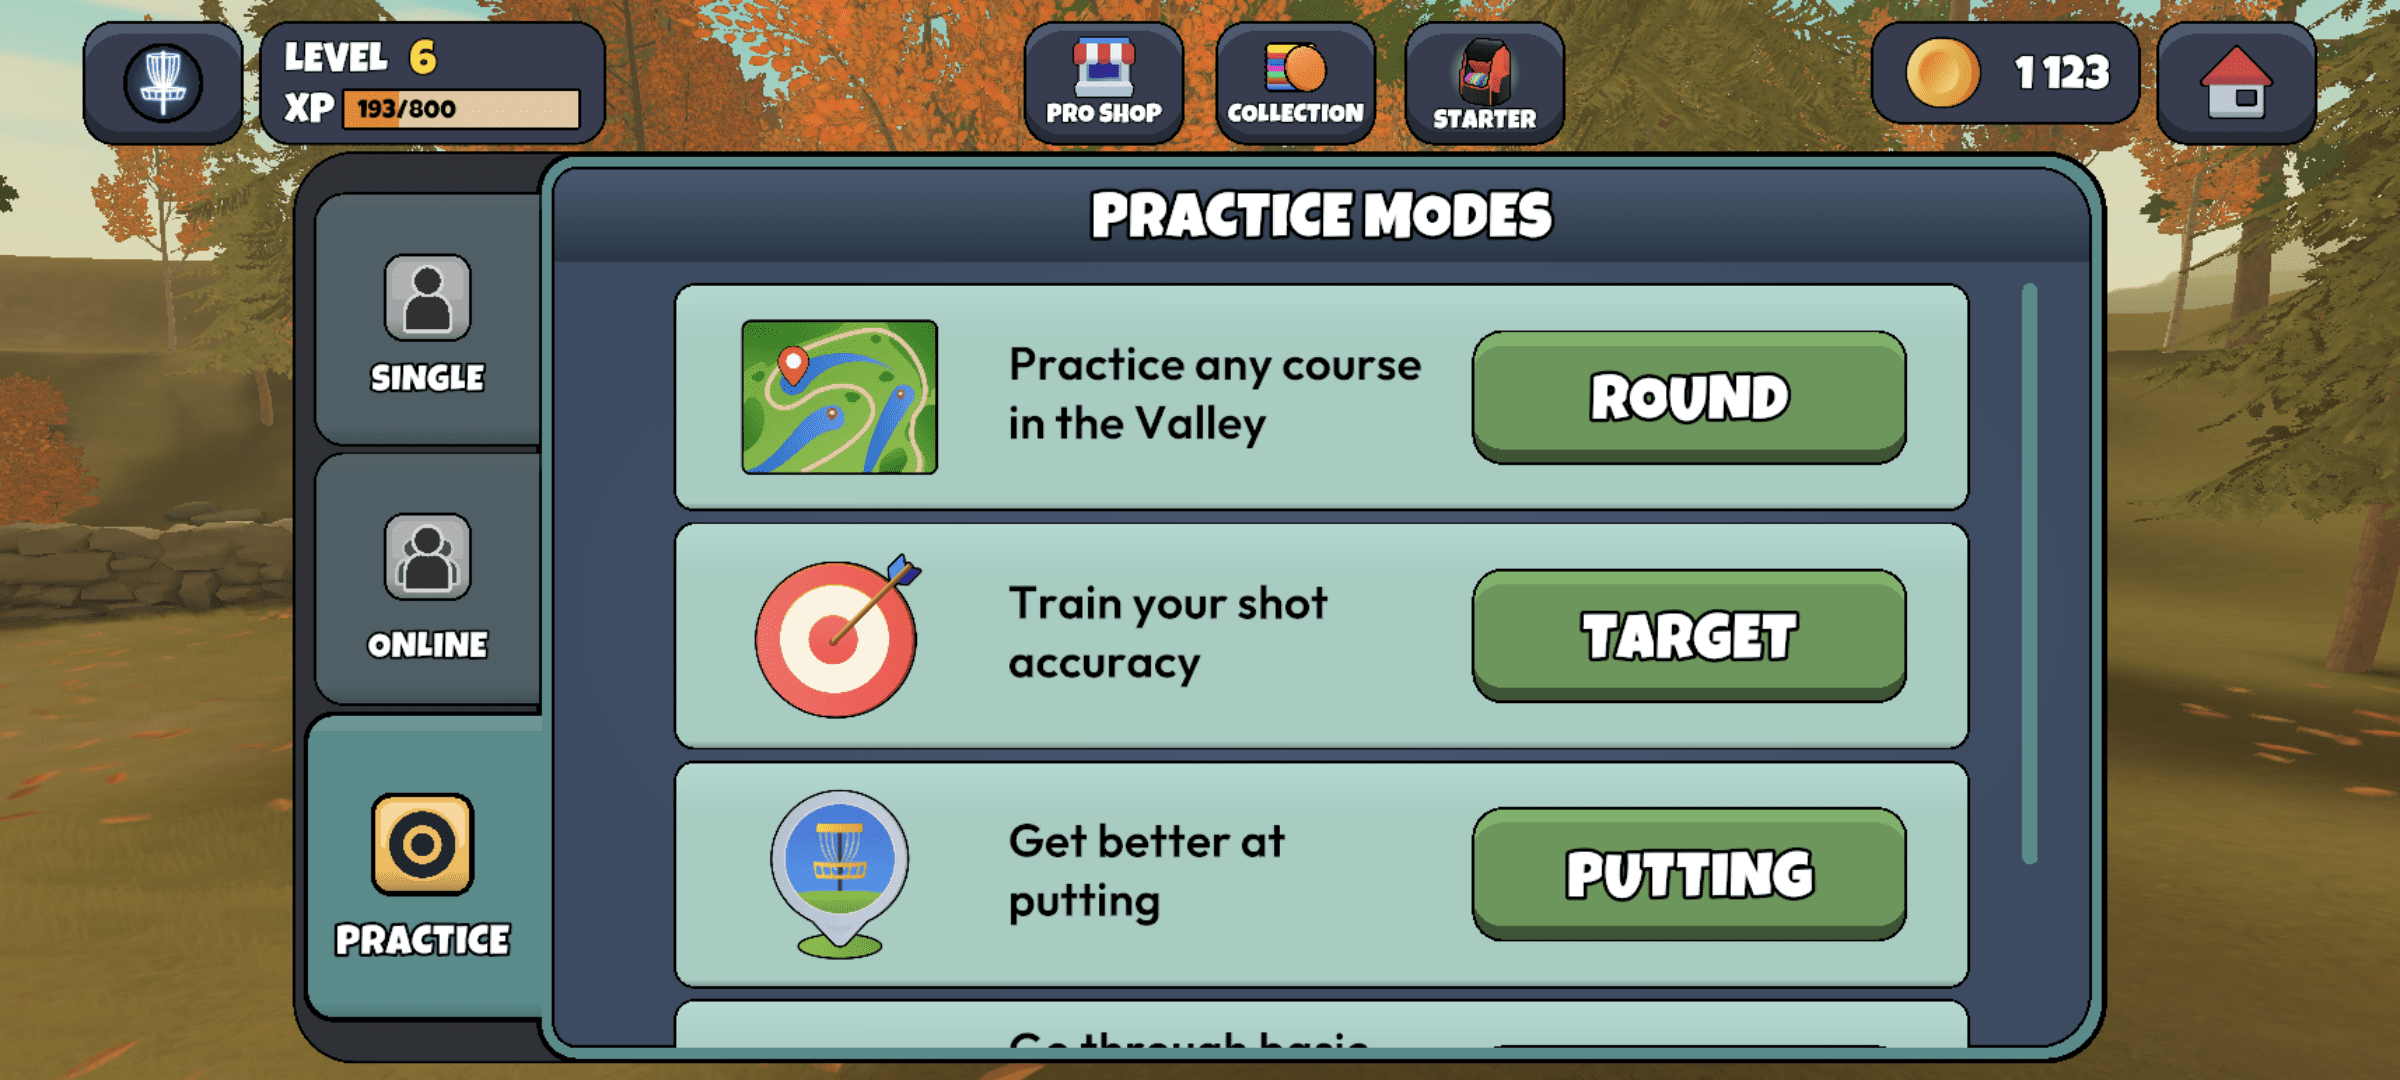 Image: Practice modes screen in 'Disc Golf Valley'